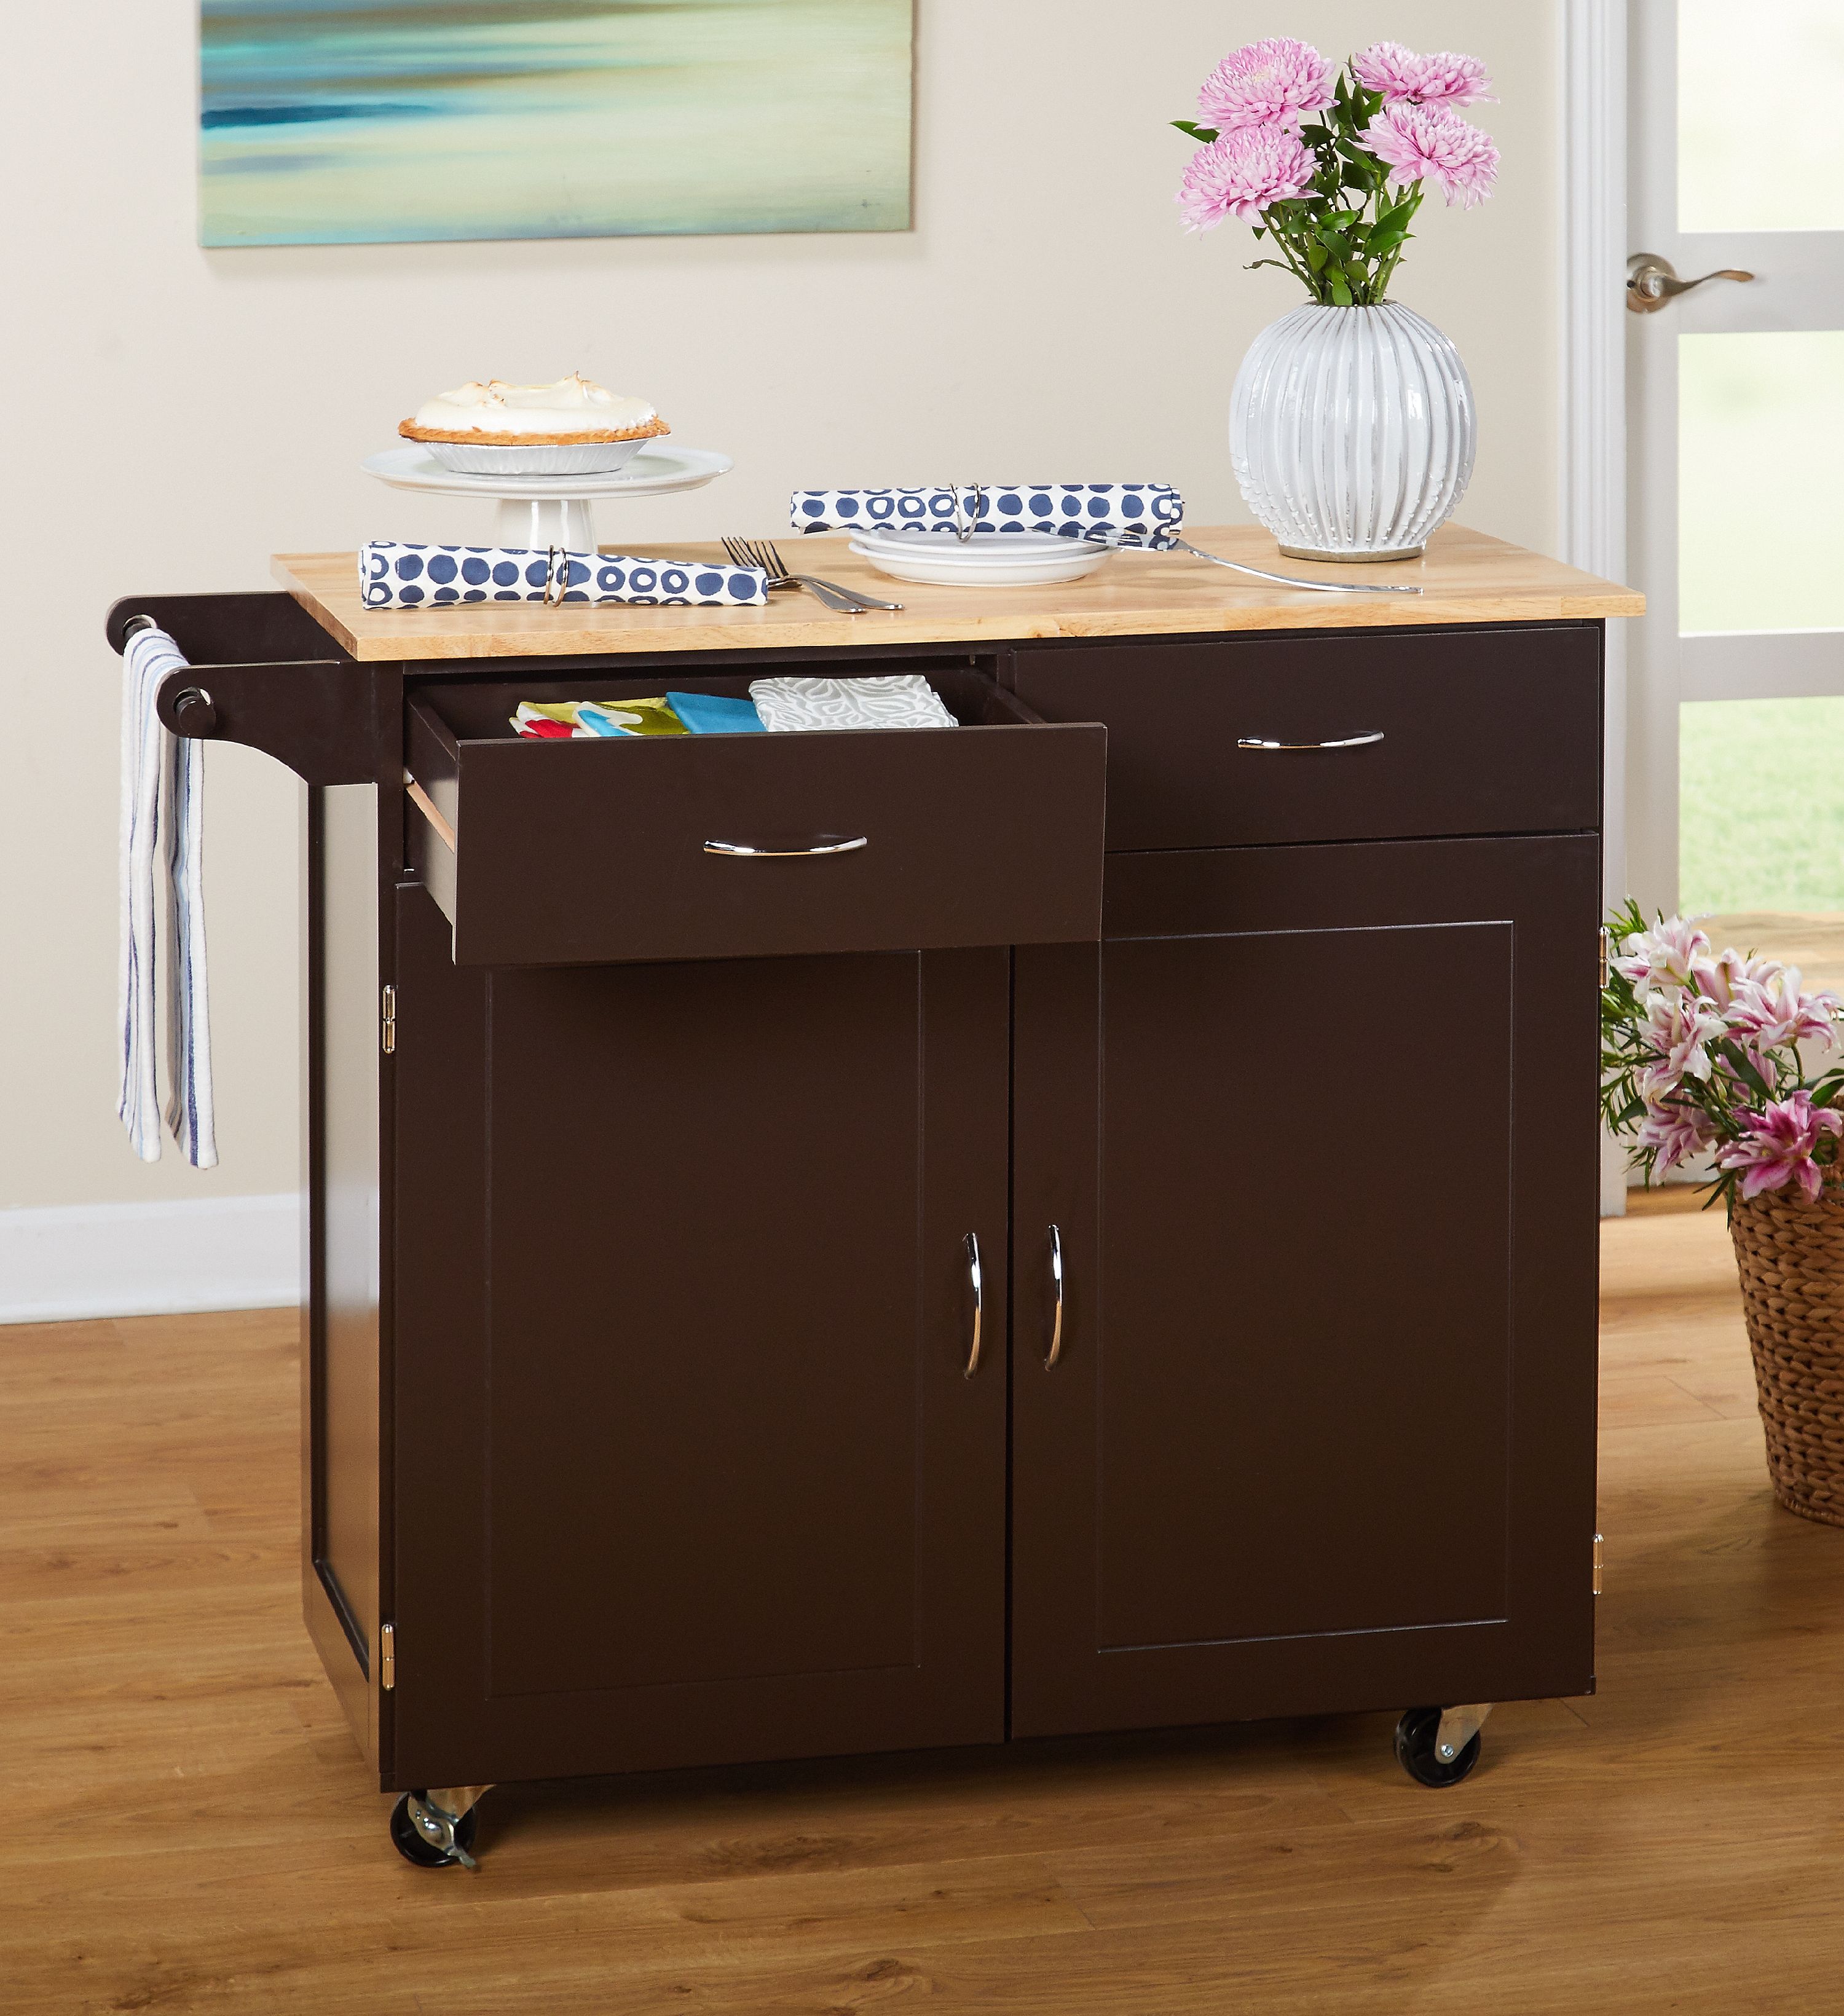 TMS Large Kitchen Cart with Rubber wood Top, Espresso - image 3 of 5